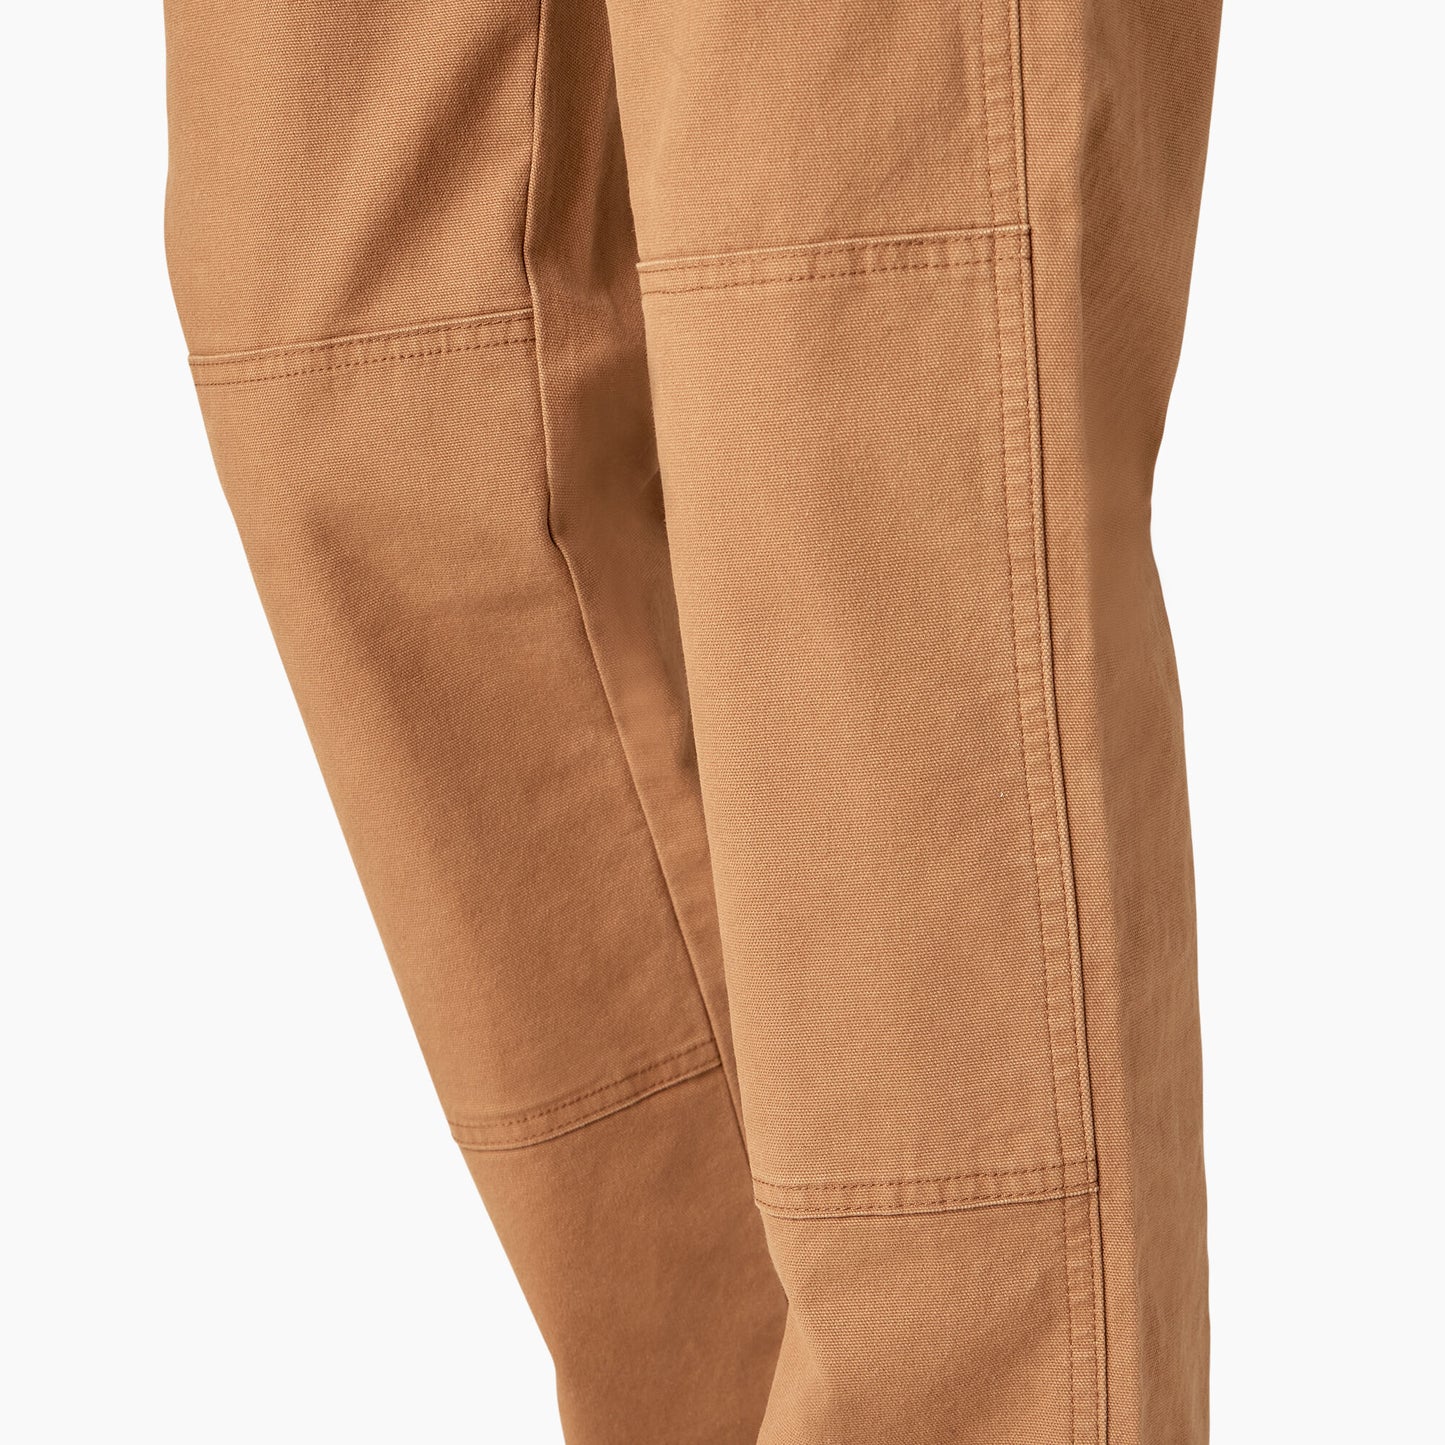 Dickies x Jameson Women's Utility Double Knee Overall - Rinsed Brown Duck